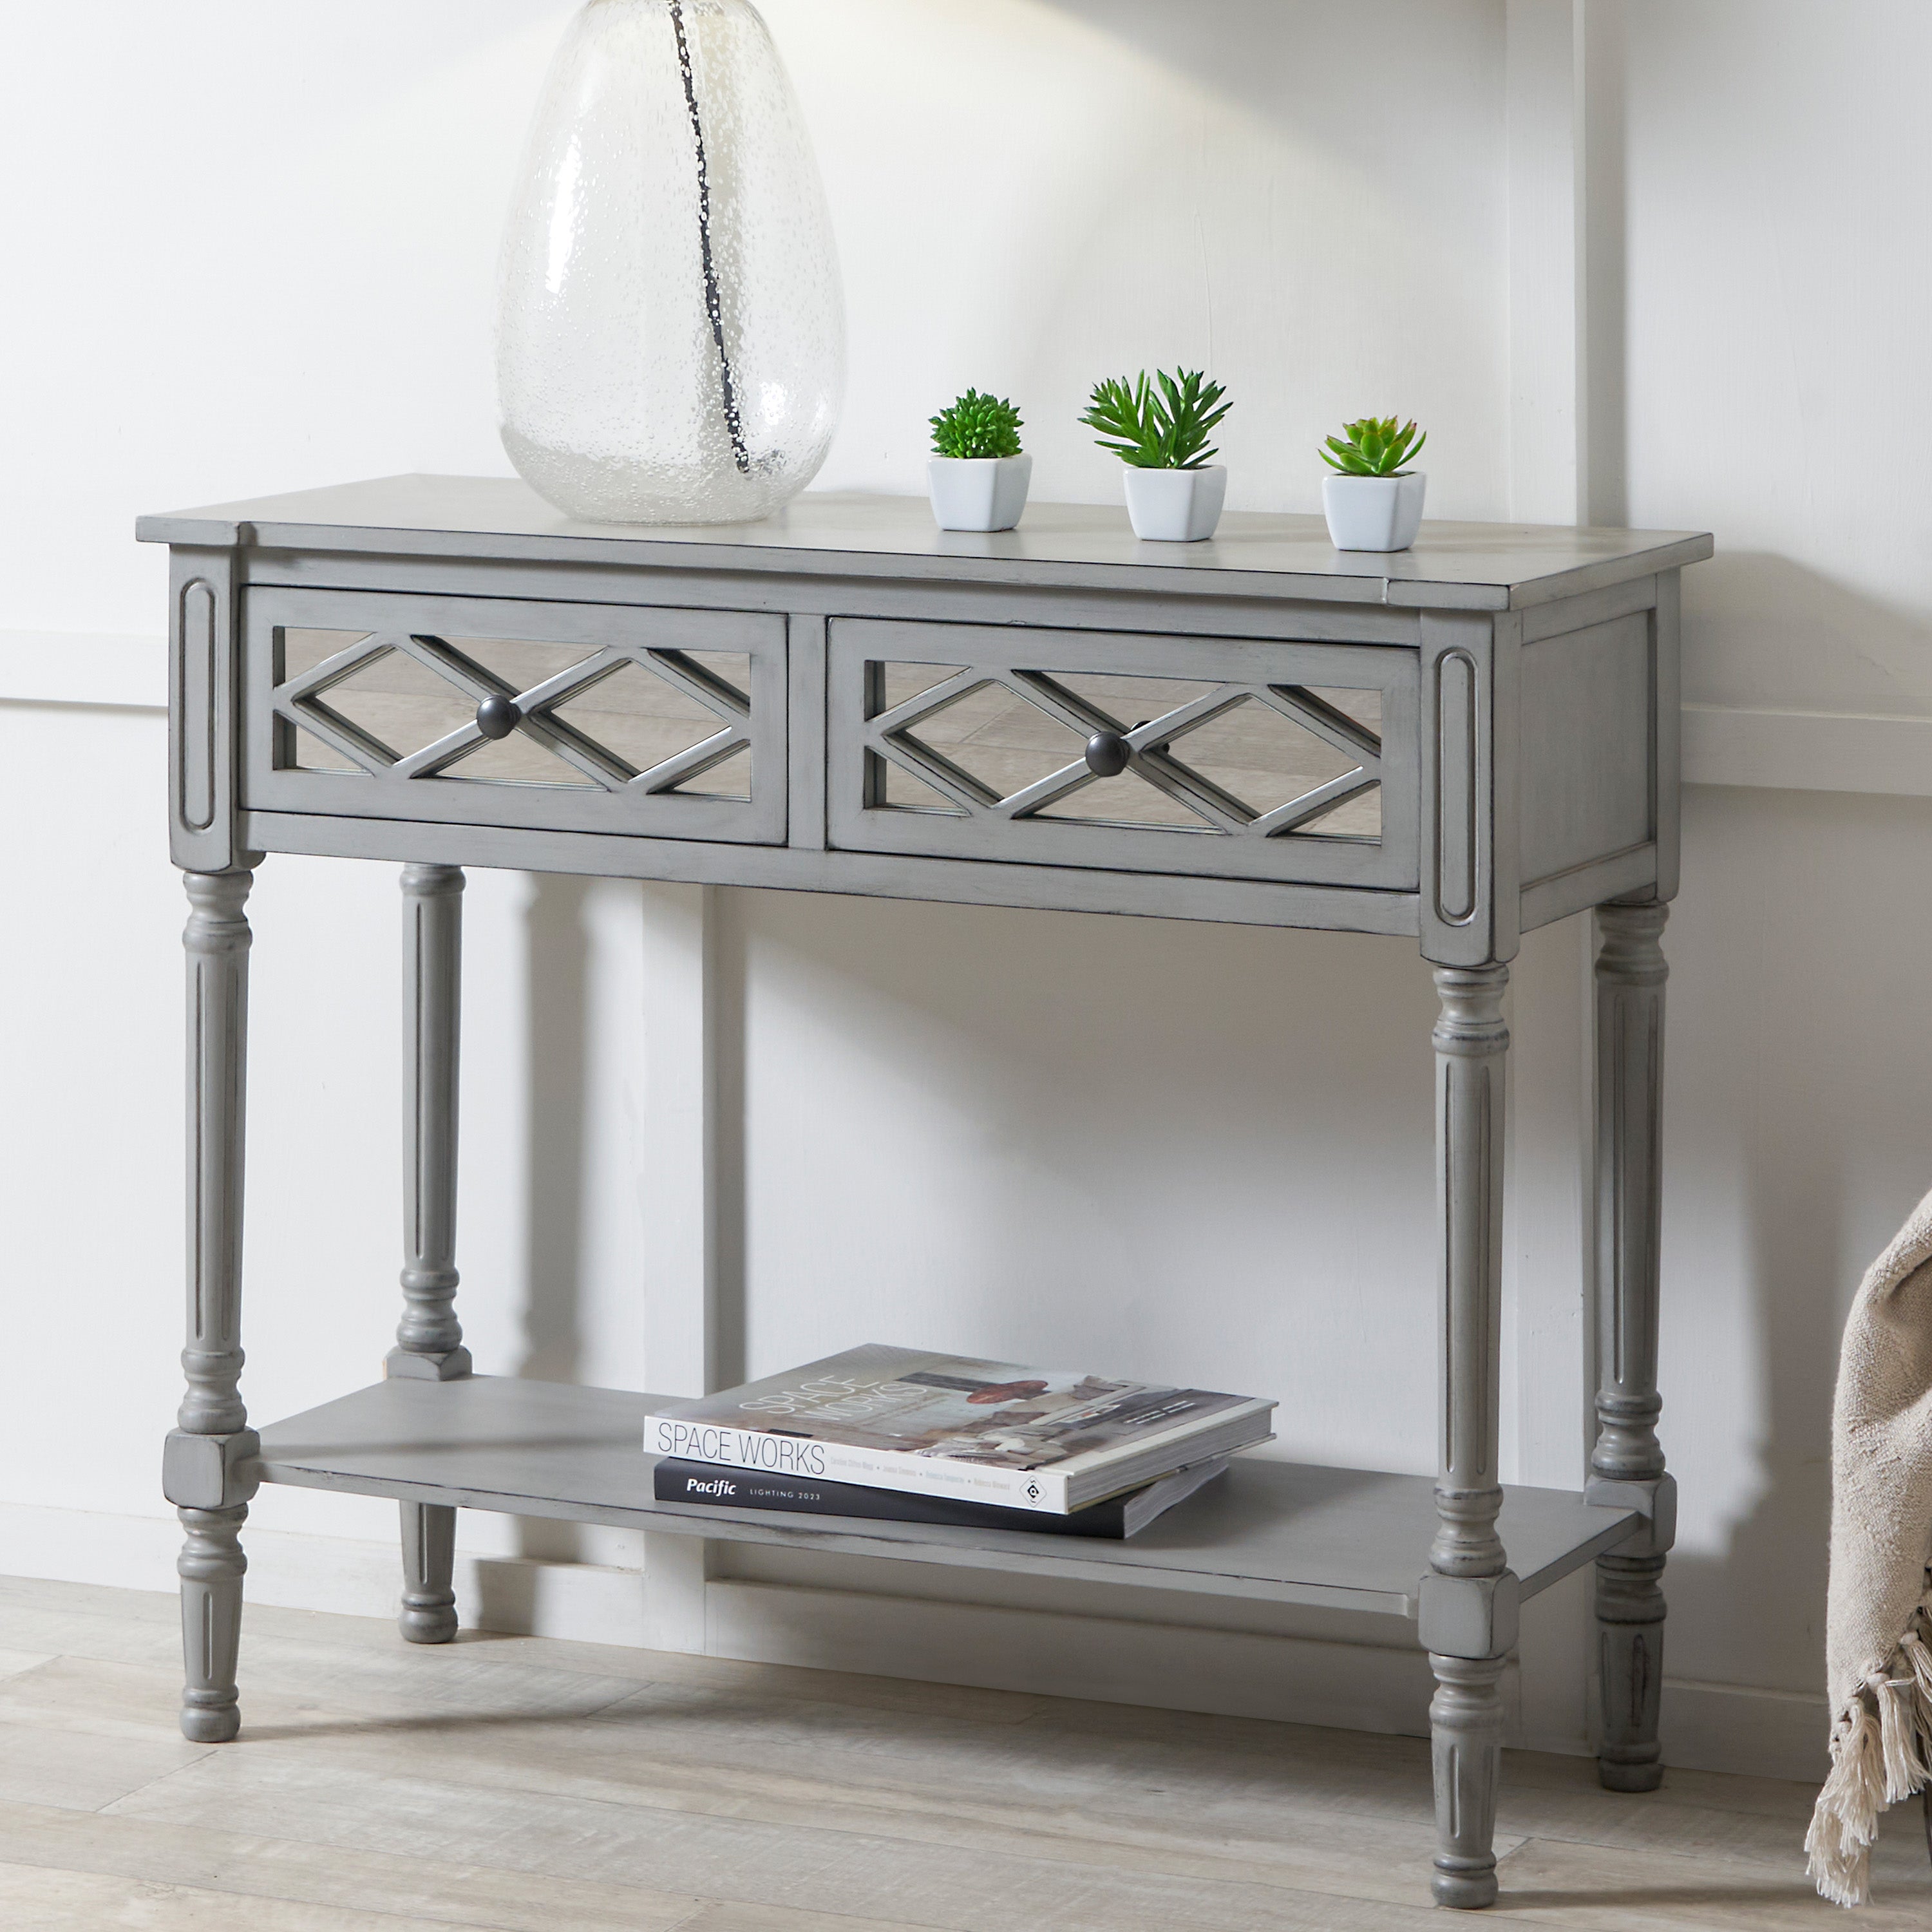 Pacific Puglia Console Table, Painted Pine